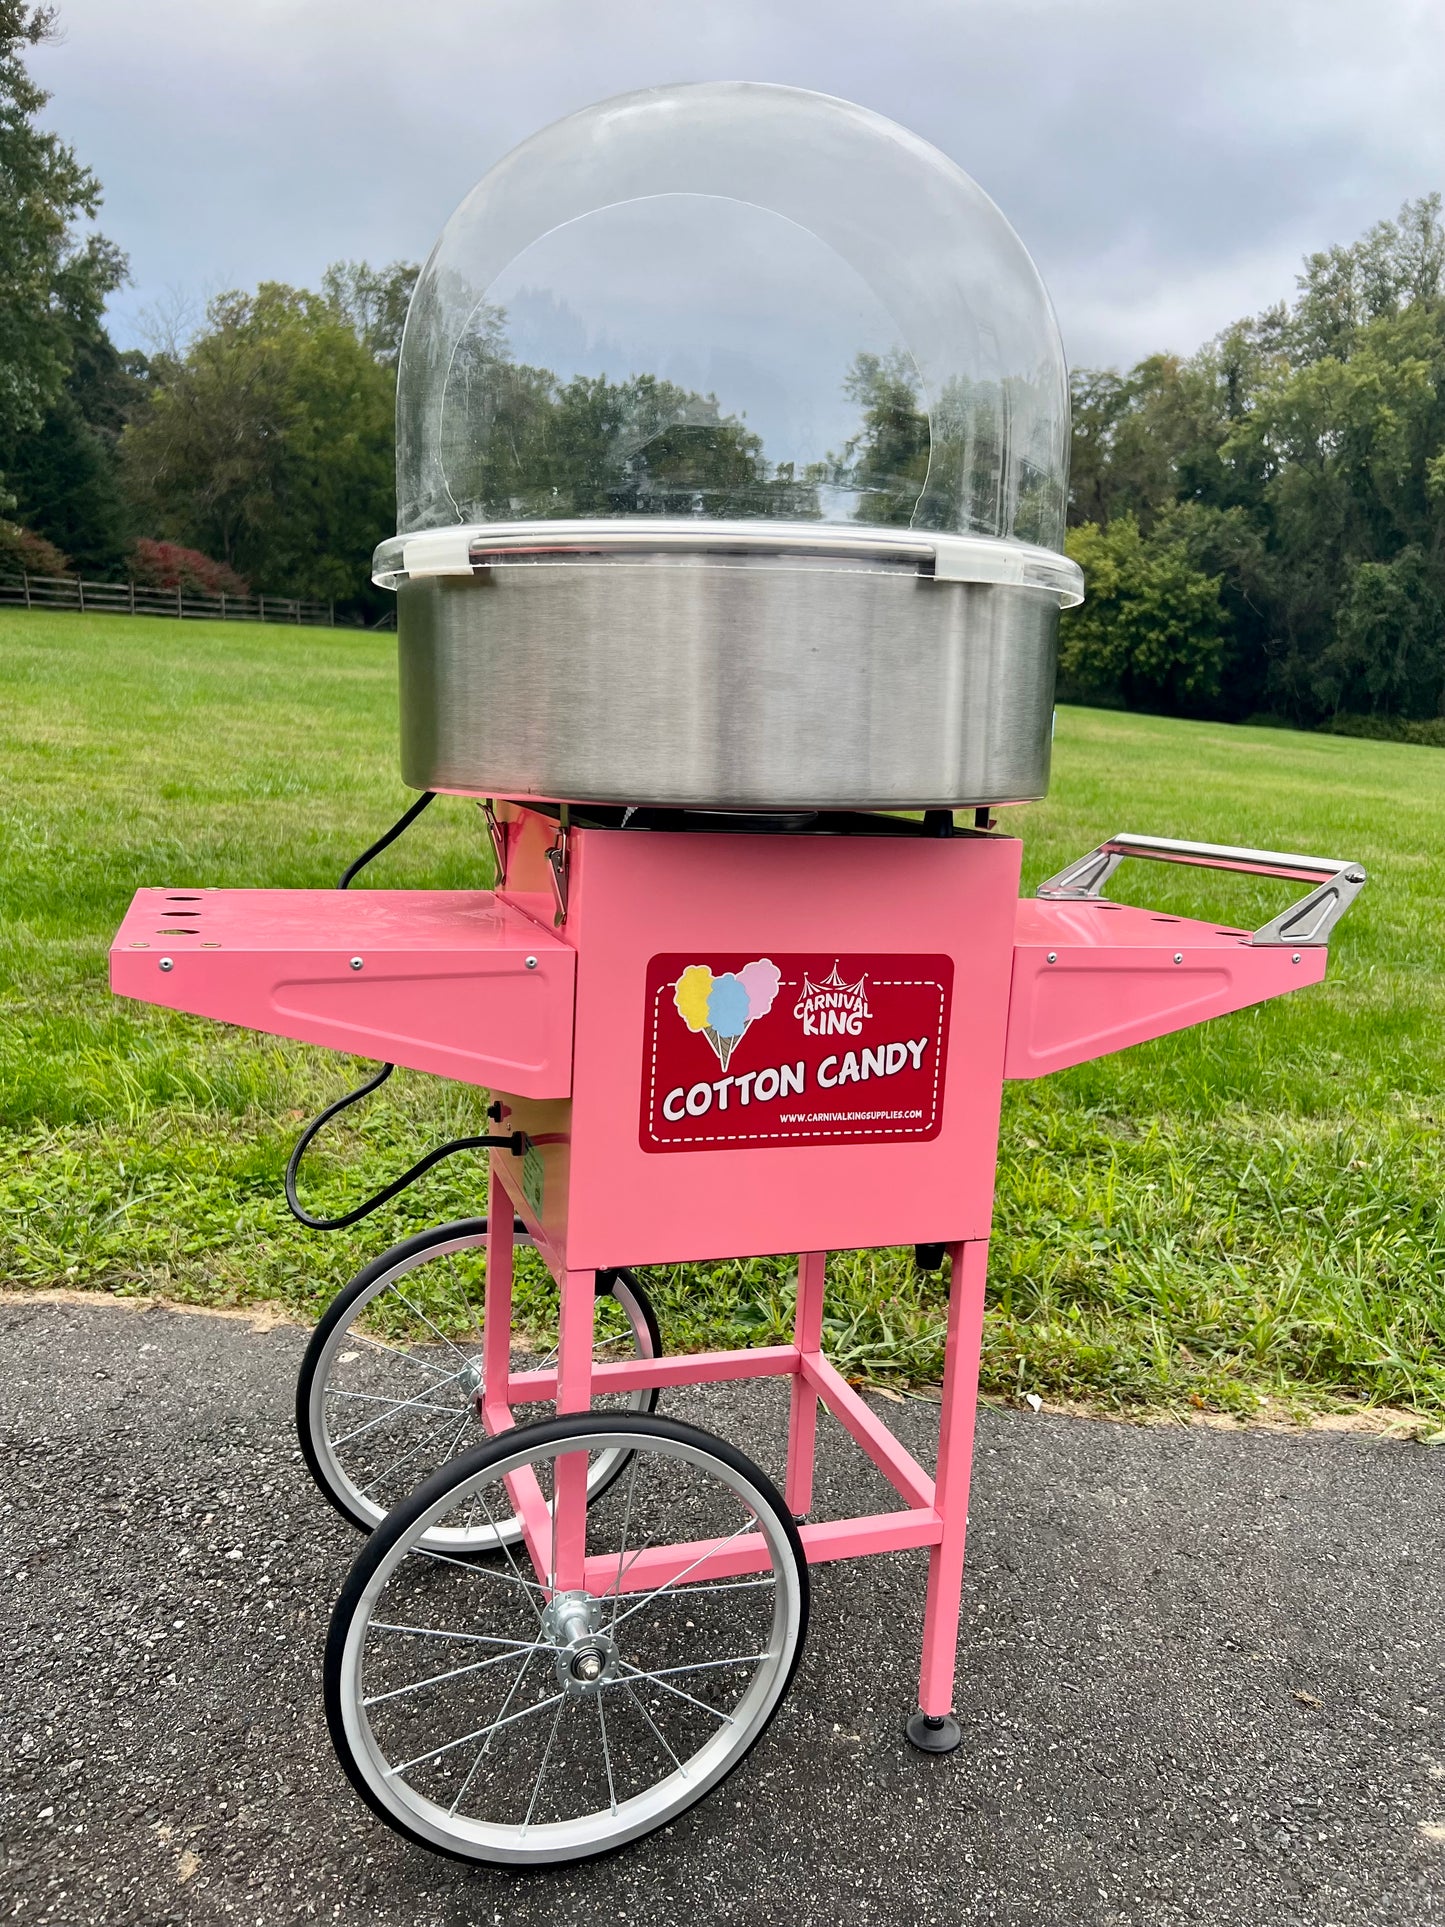 Cotton Candy Cart 12 Hour Rental ***Local Delivery Only in South East Pennsylvania***